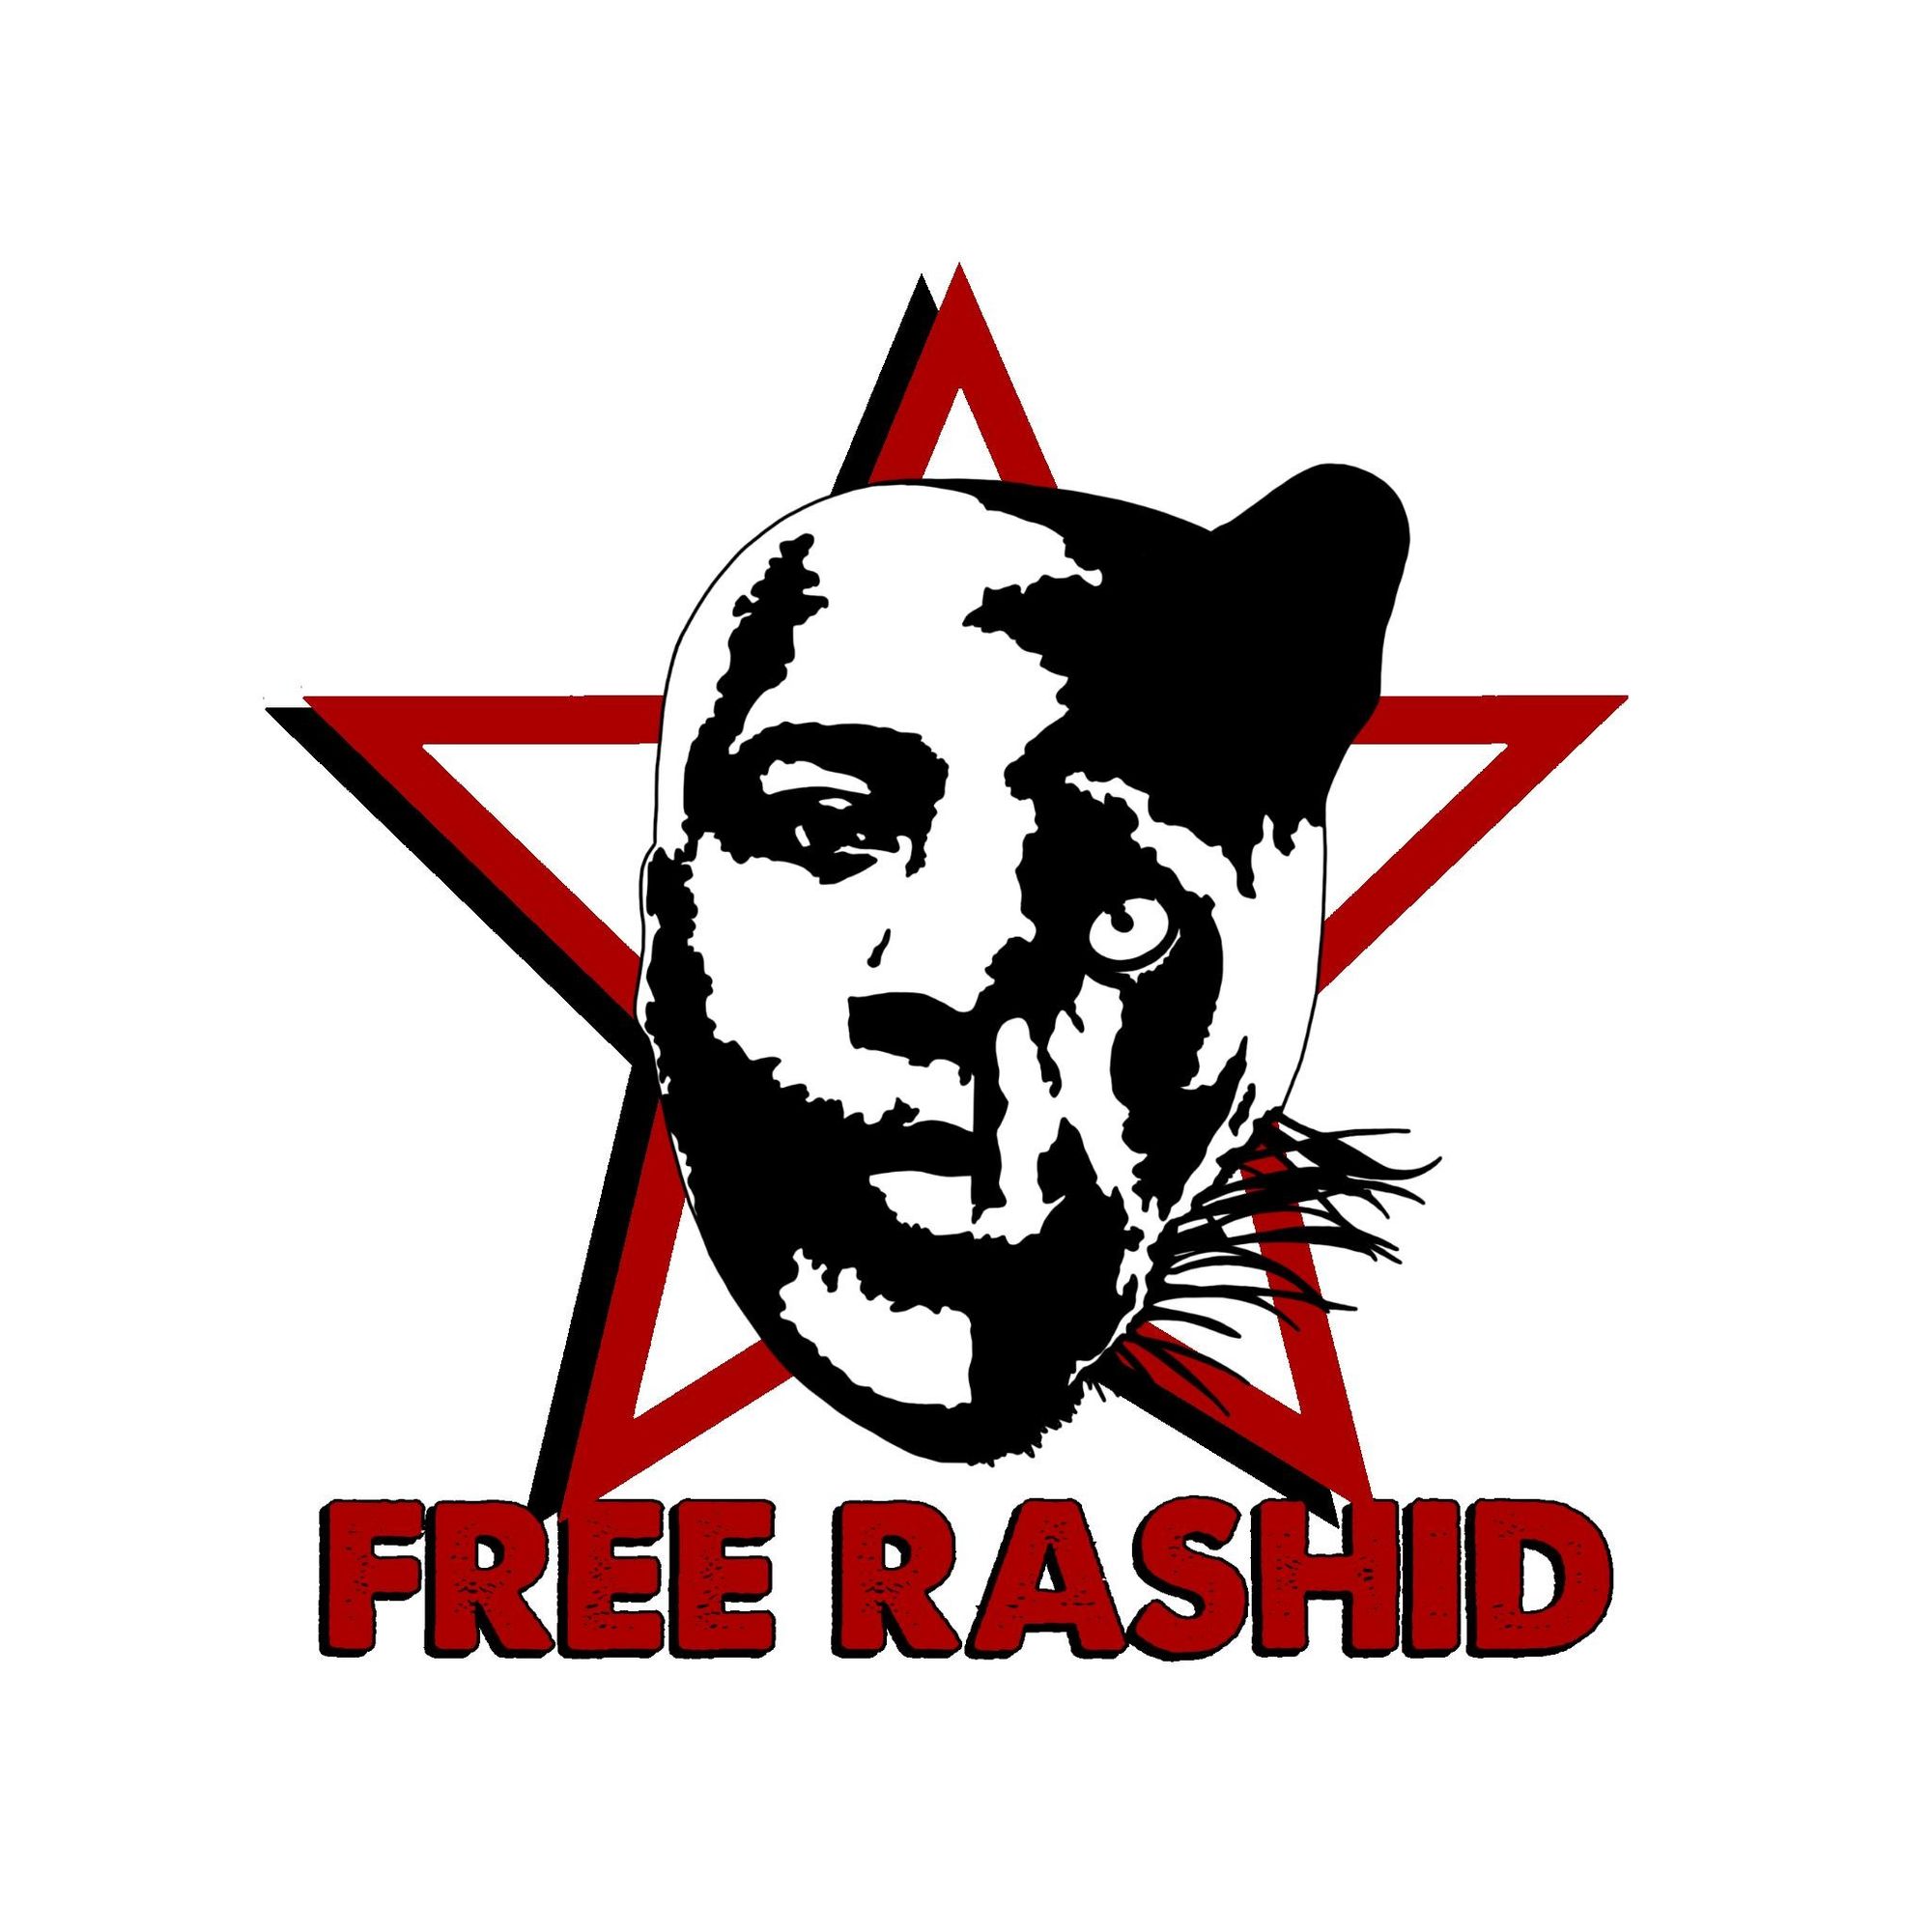 Prison Officials Continue To Deny Comrade Rashid Cancer Treatment (July 18, 2022)